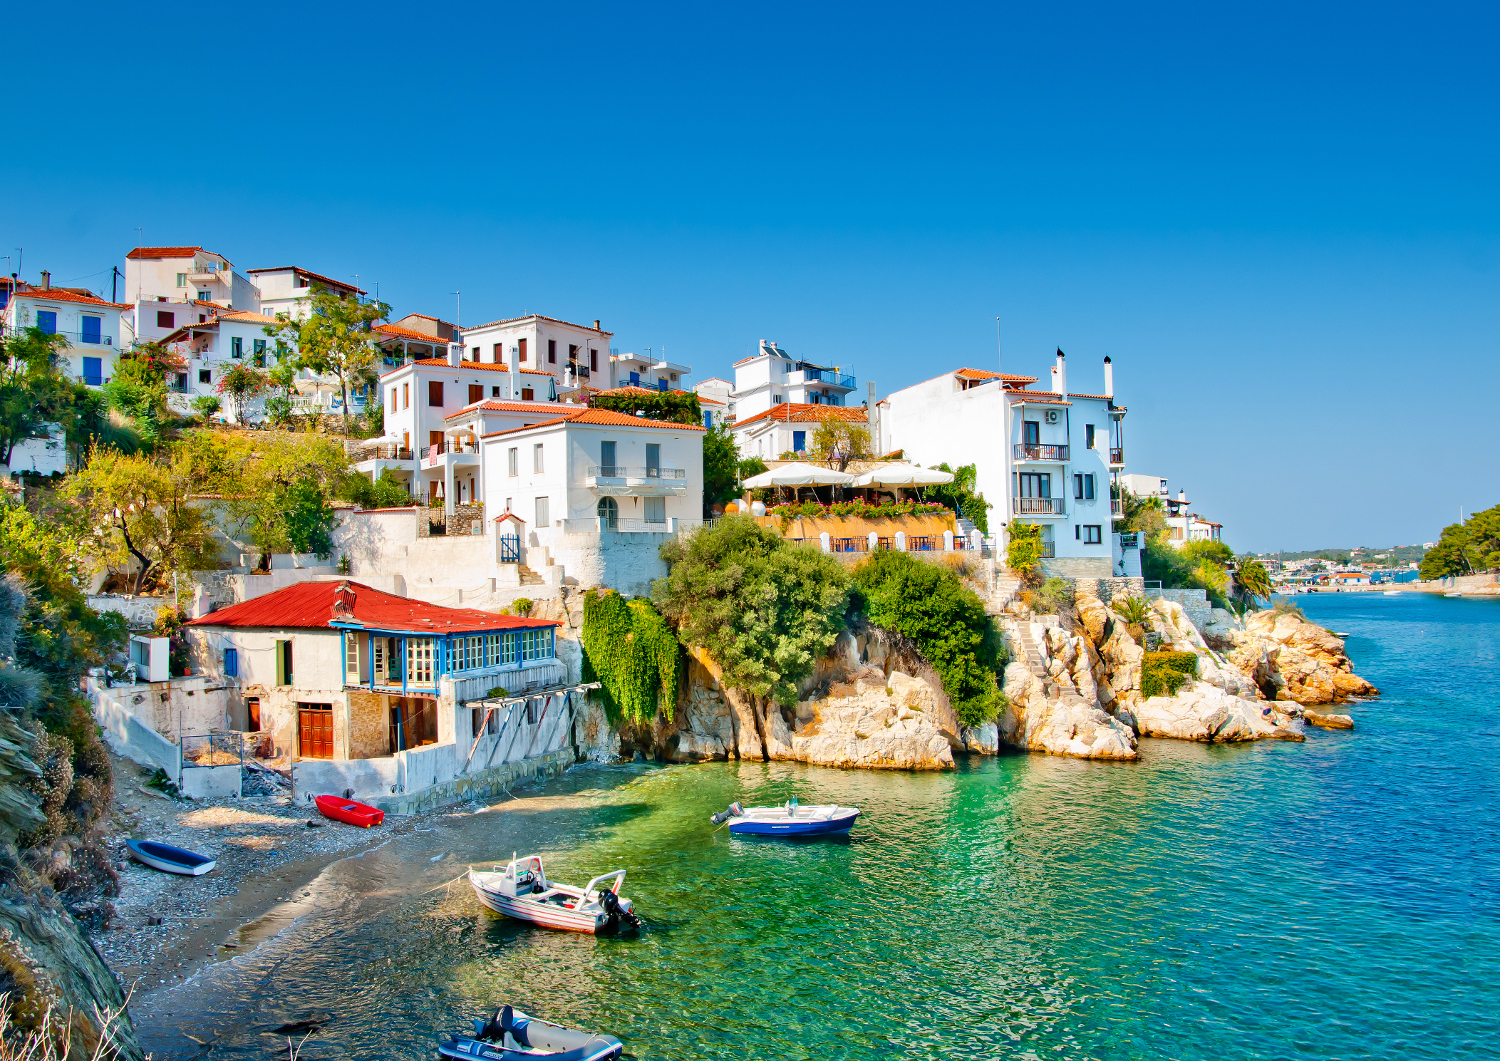 View of the local life and turquoise waters in Skiathos